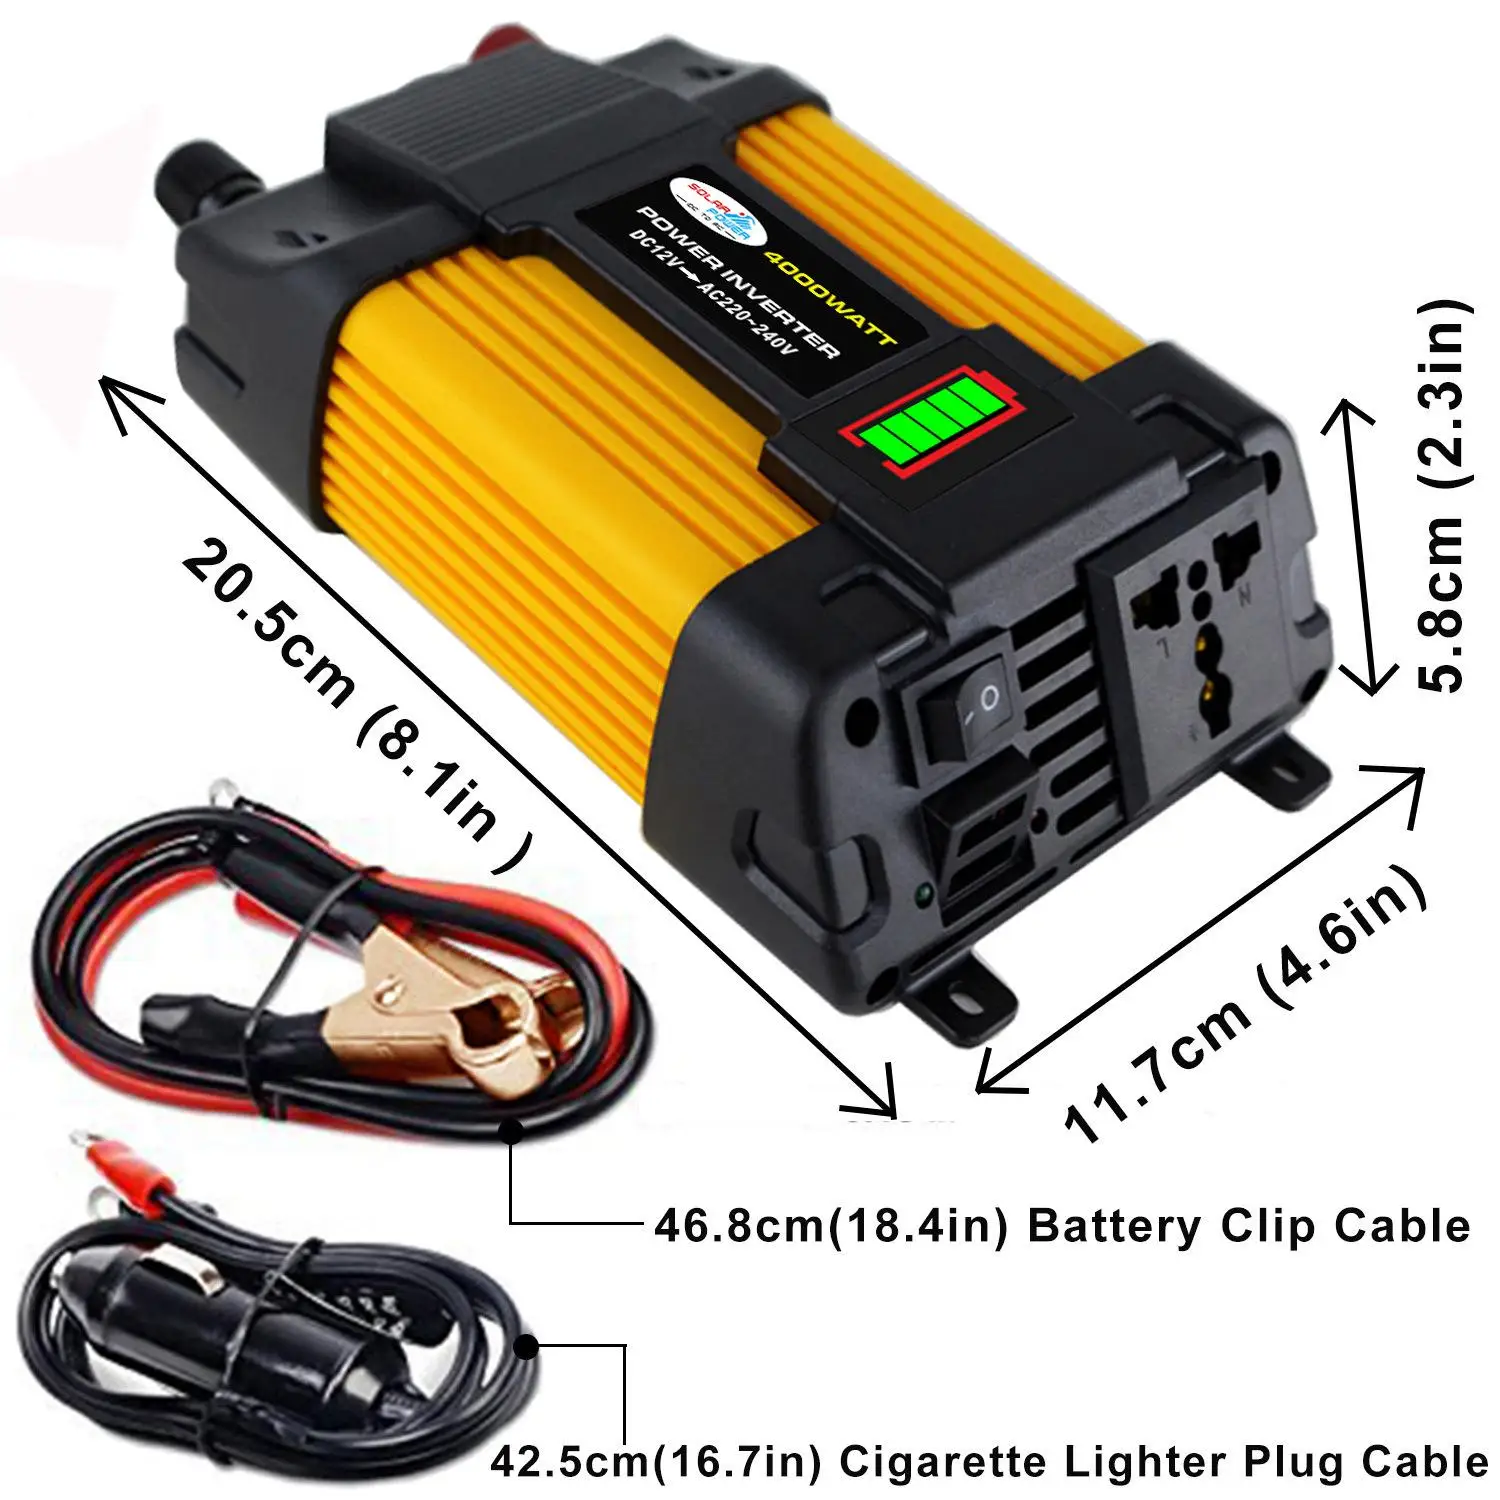 Car Switching Inverter Peak 4000W/6000W DC12V to AC110/220V Auto Voltage Converter Adapter Transformer LED Display Dual USB images - 6